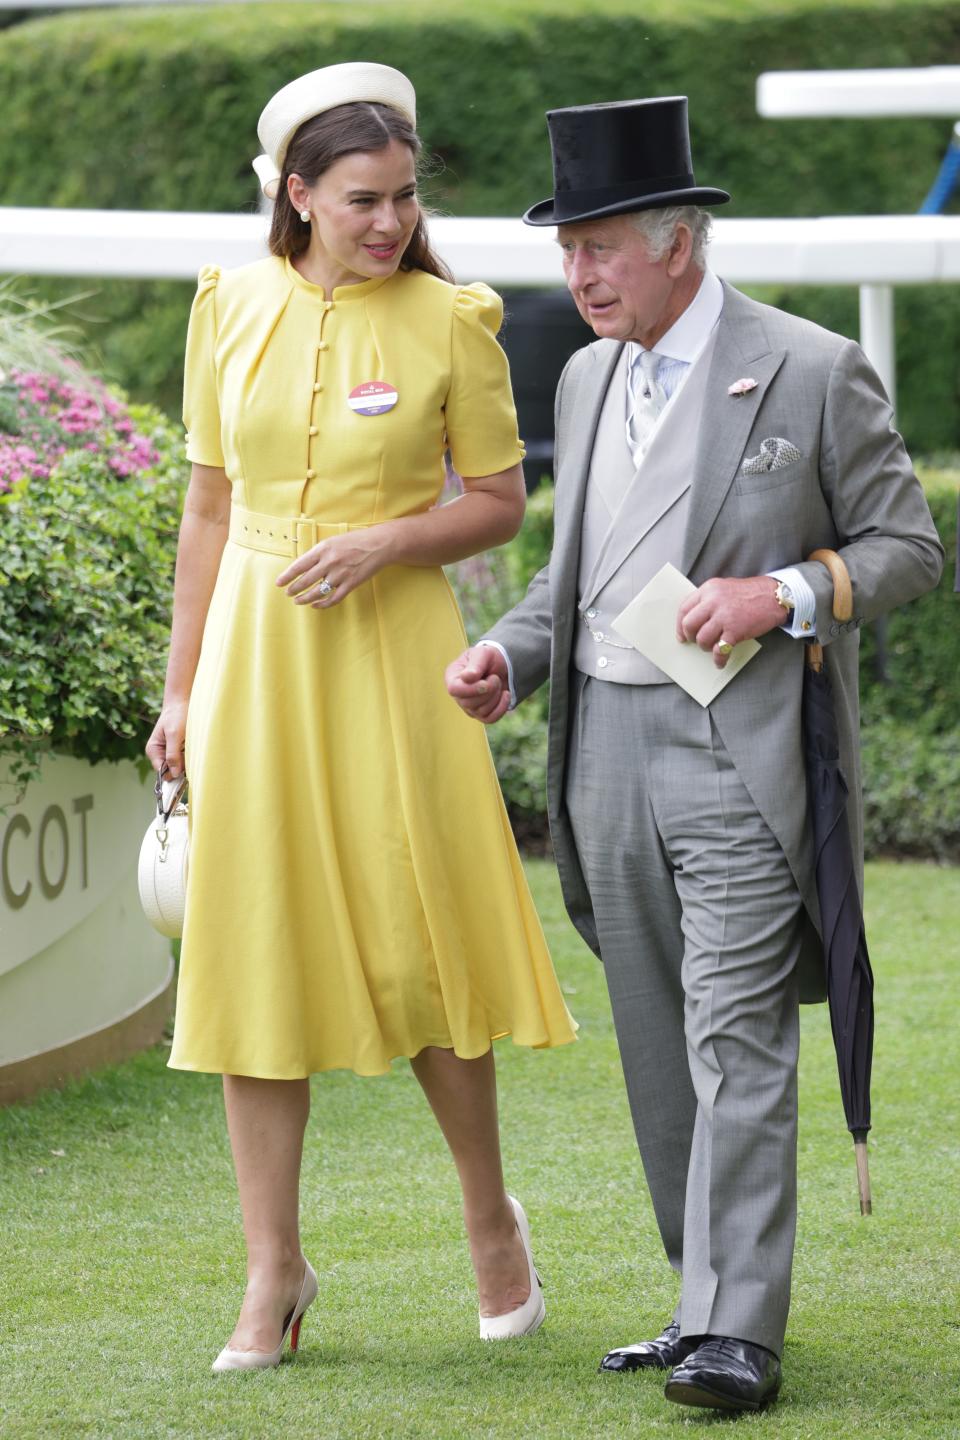 Lady Sophie Winkleman wearing a bright yellow dress while walking with King Charles III.